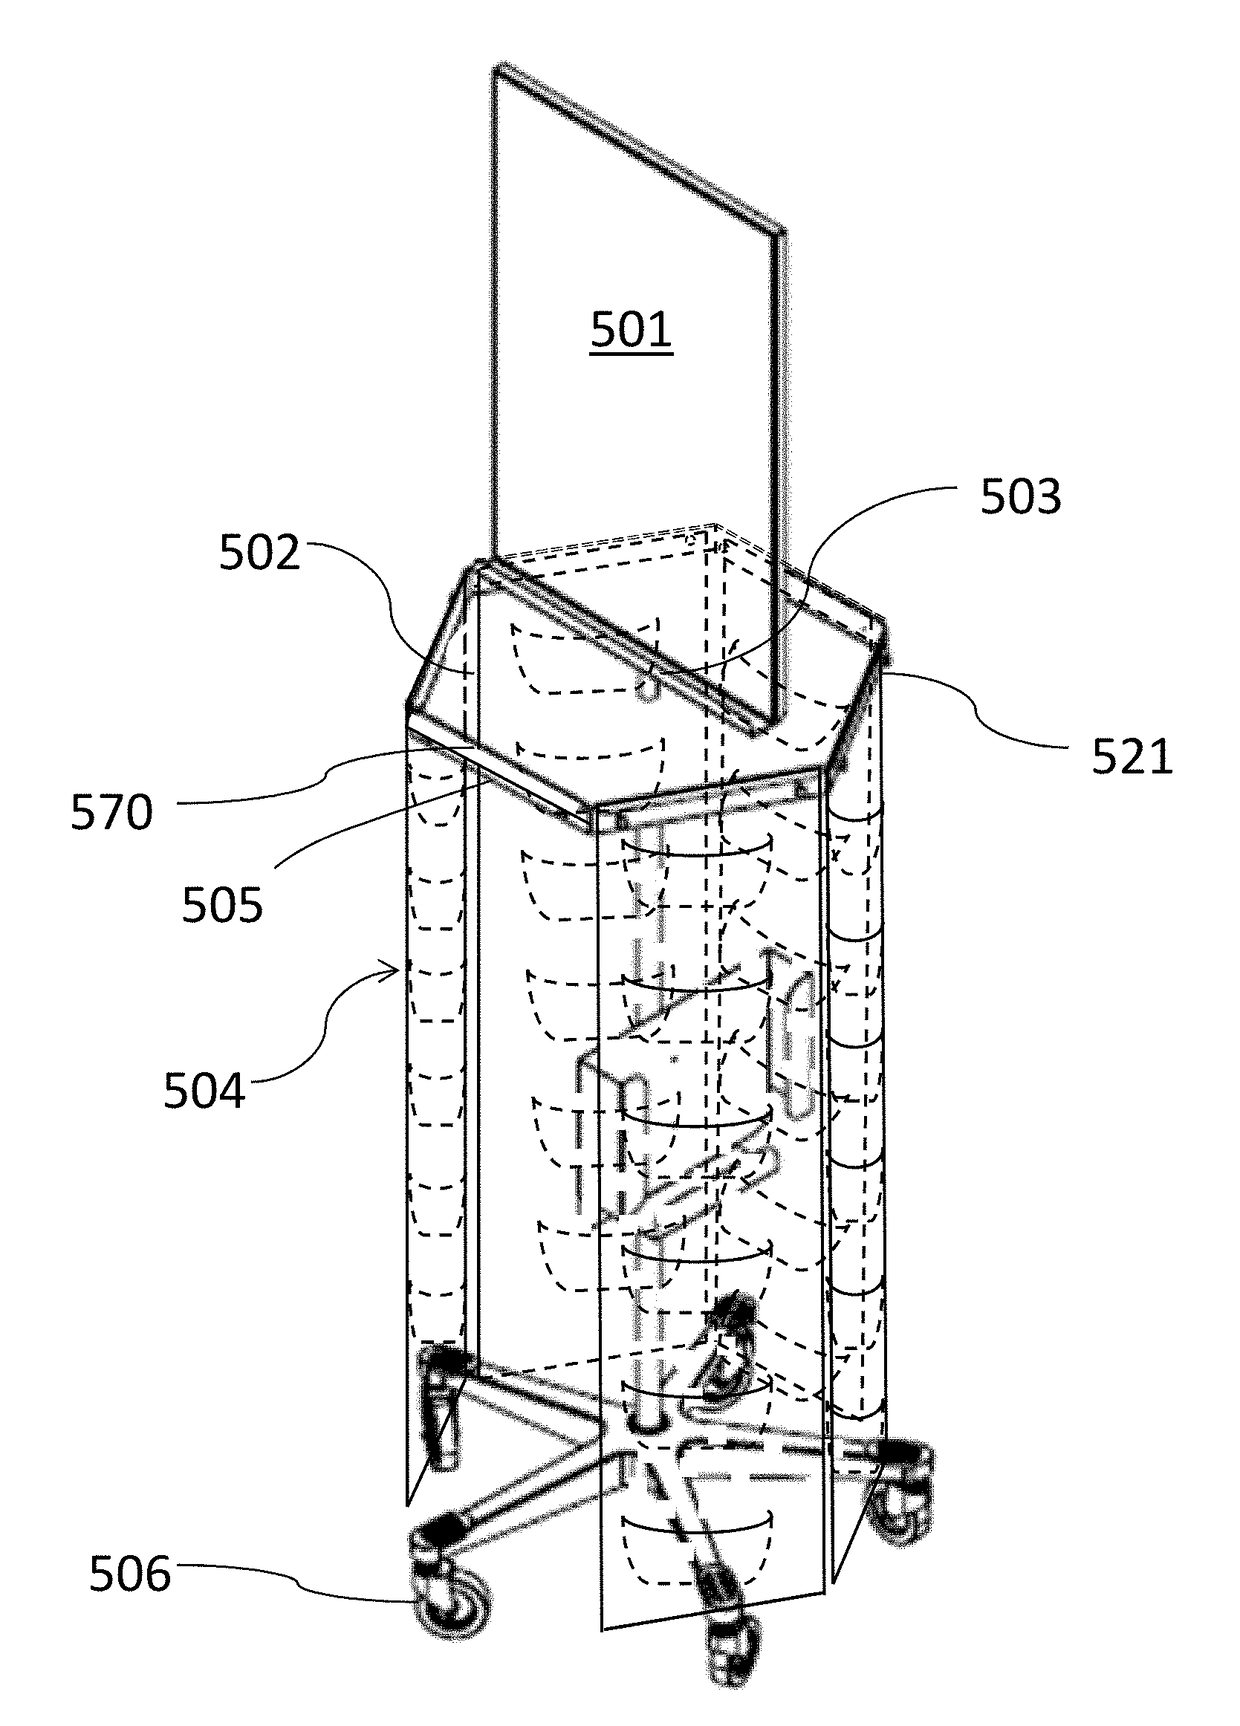 Surgical item counting station and method of use